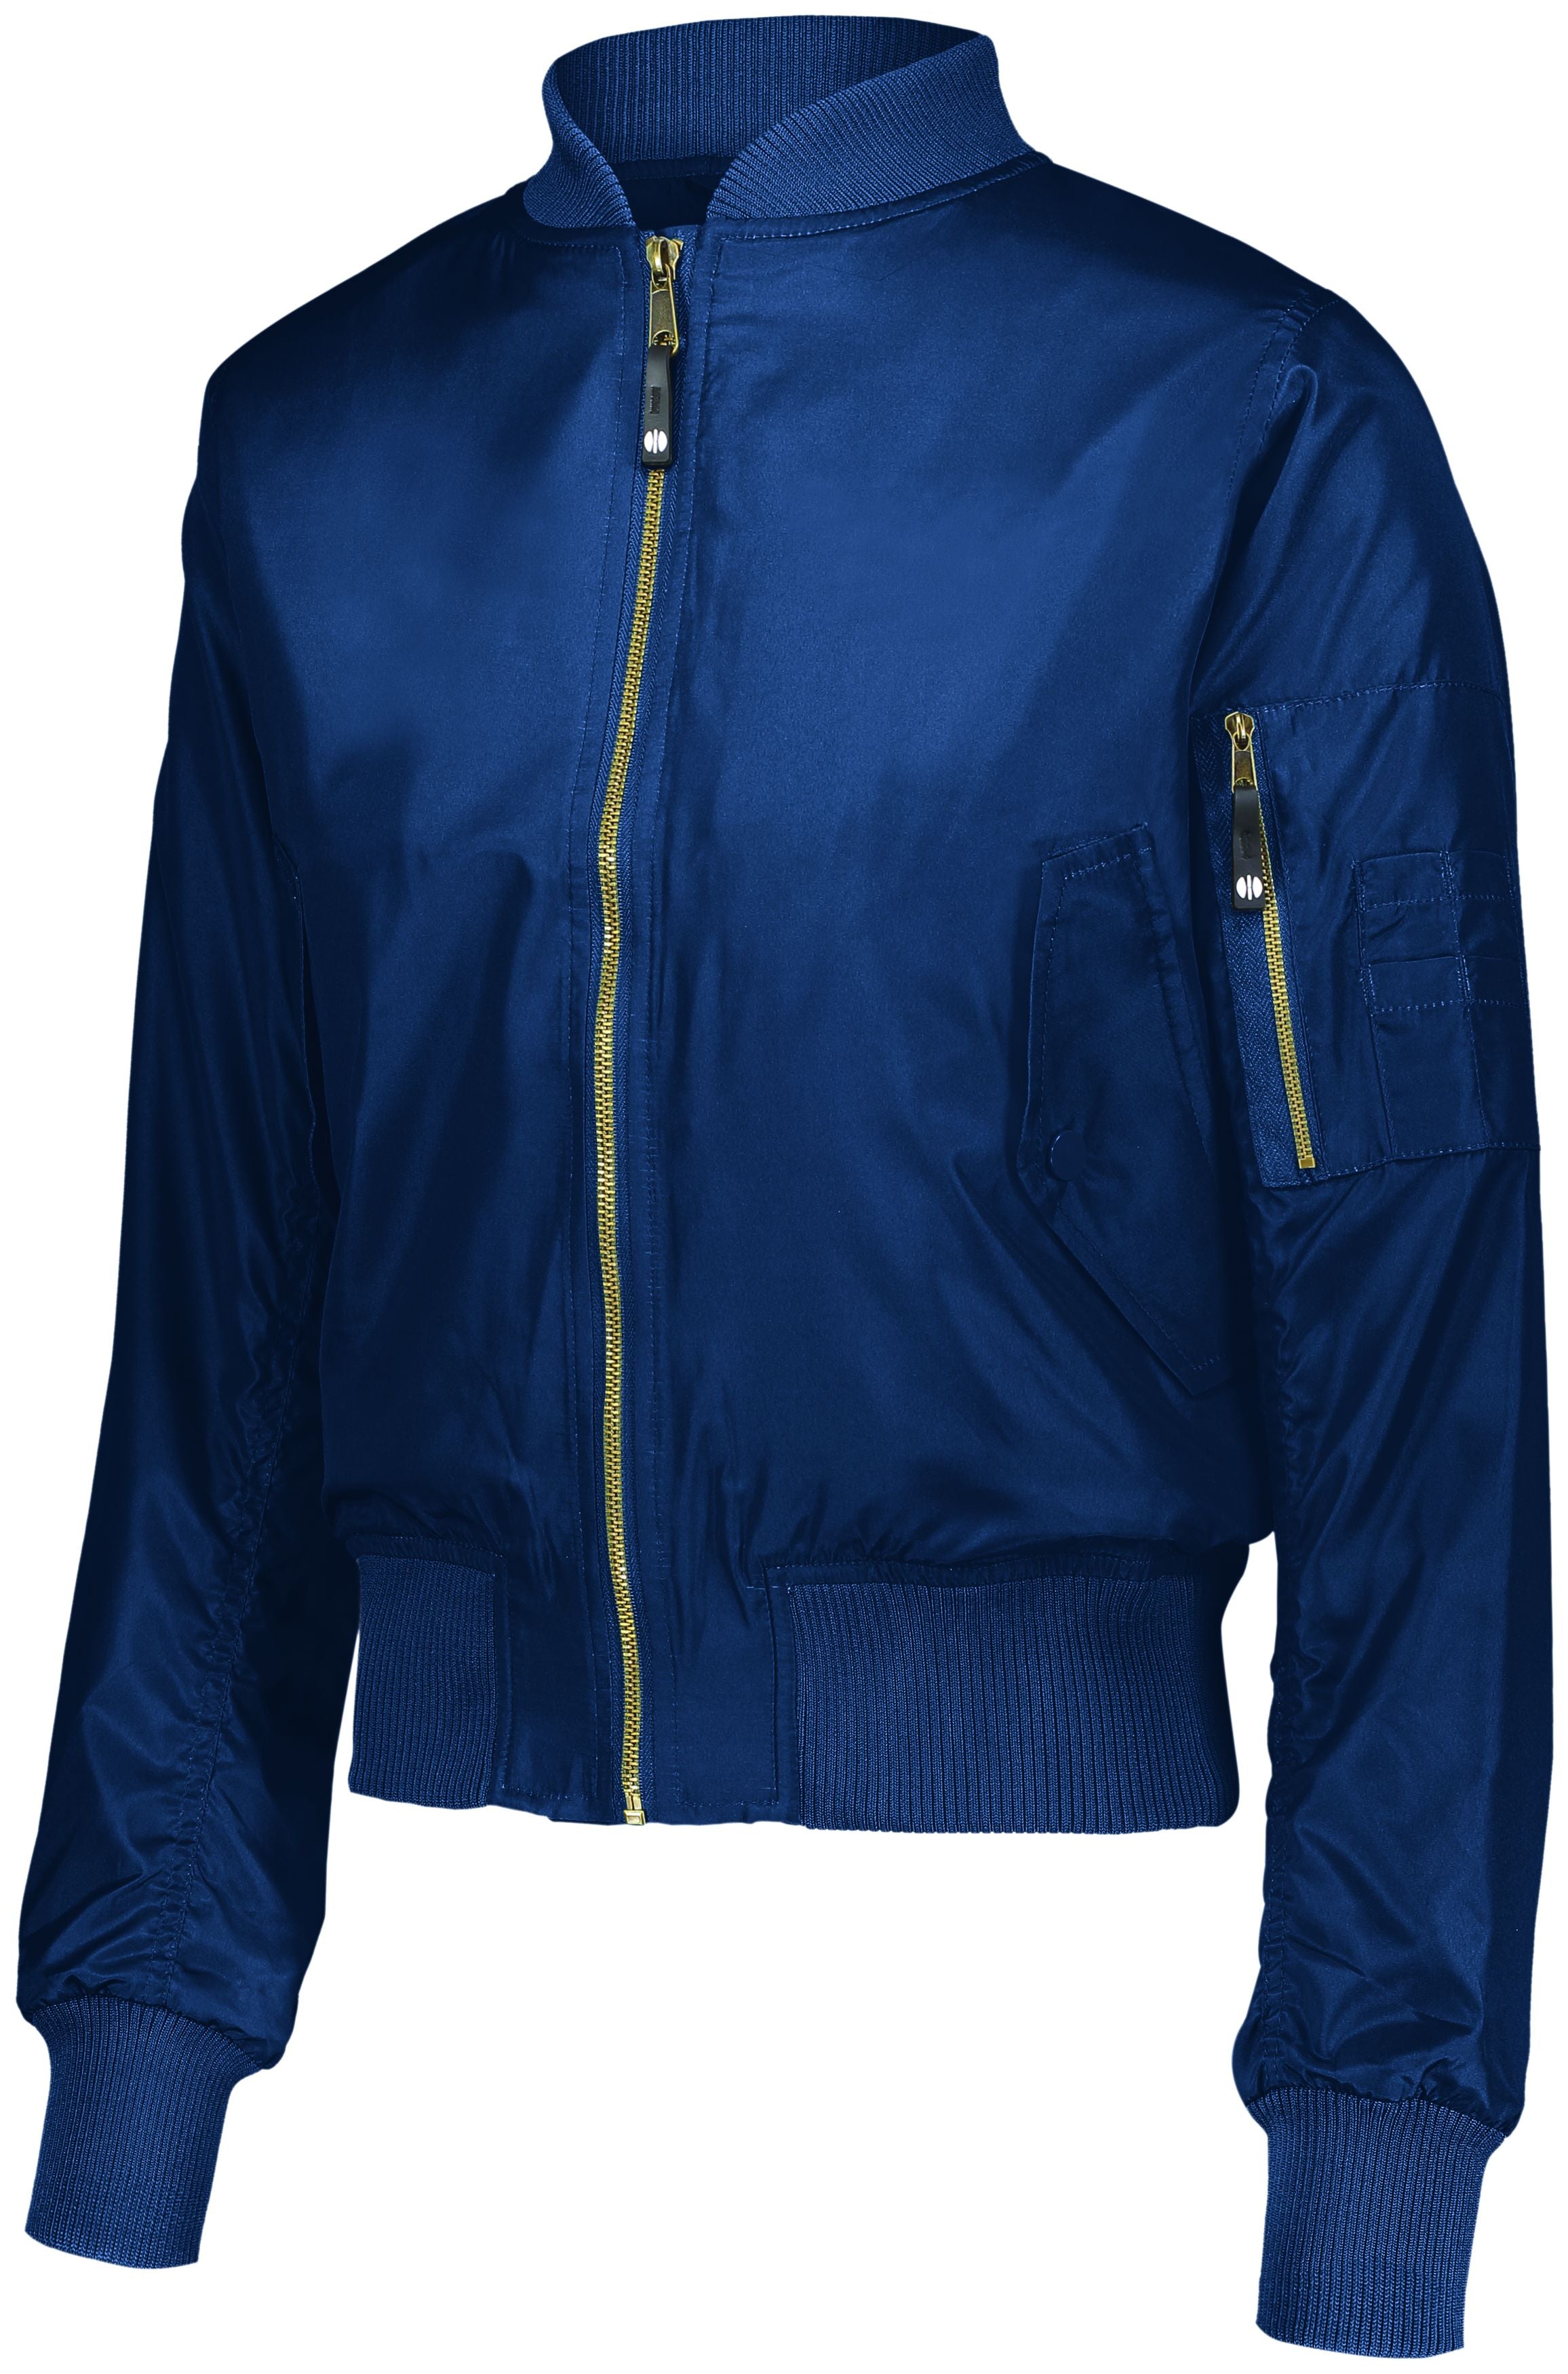 Holloway Ladies Flight Bomber Jacket in Navy  -Part of the Ladies, Ladies-Jacket, Holloway, Outerwear product lines at KanaleyCreations.com